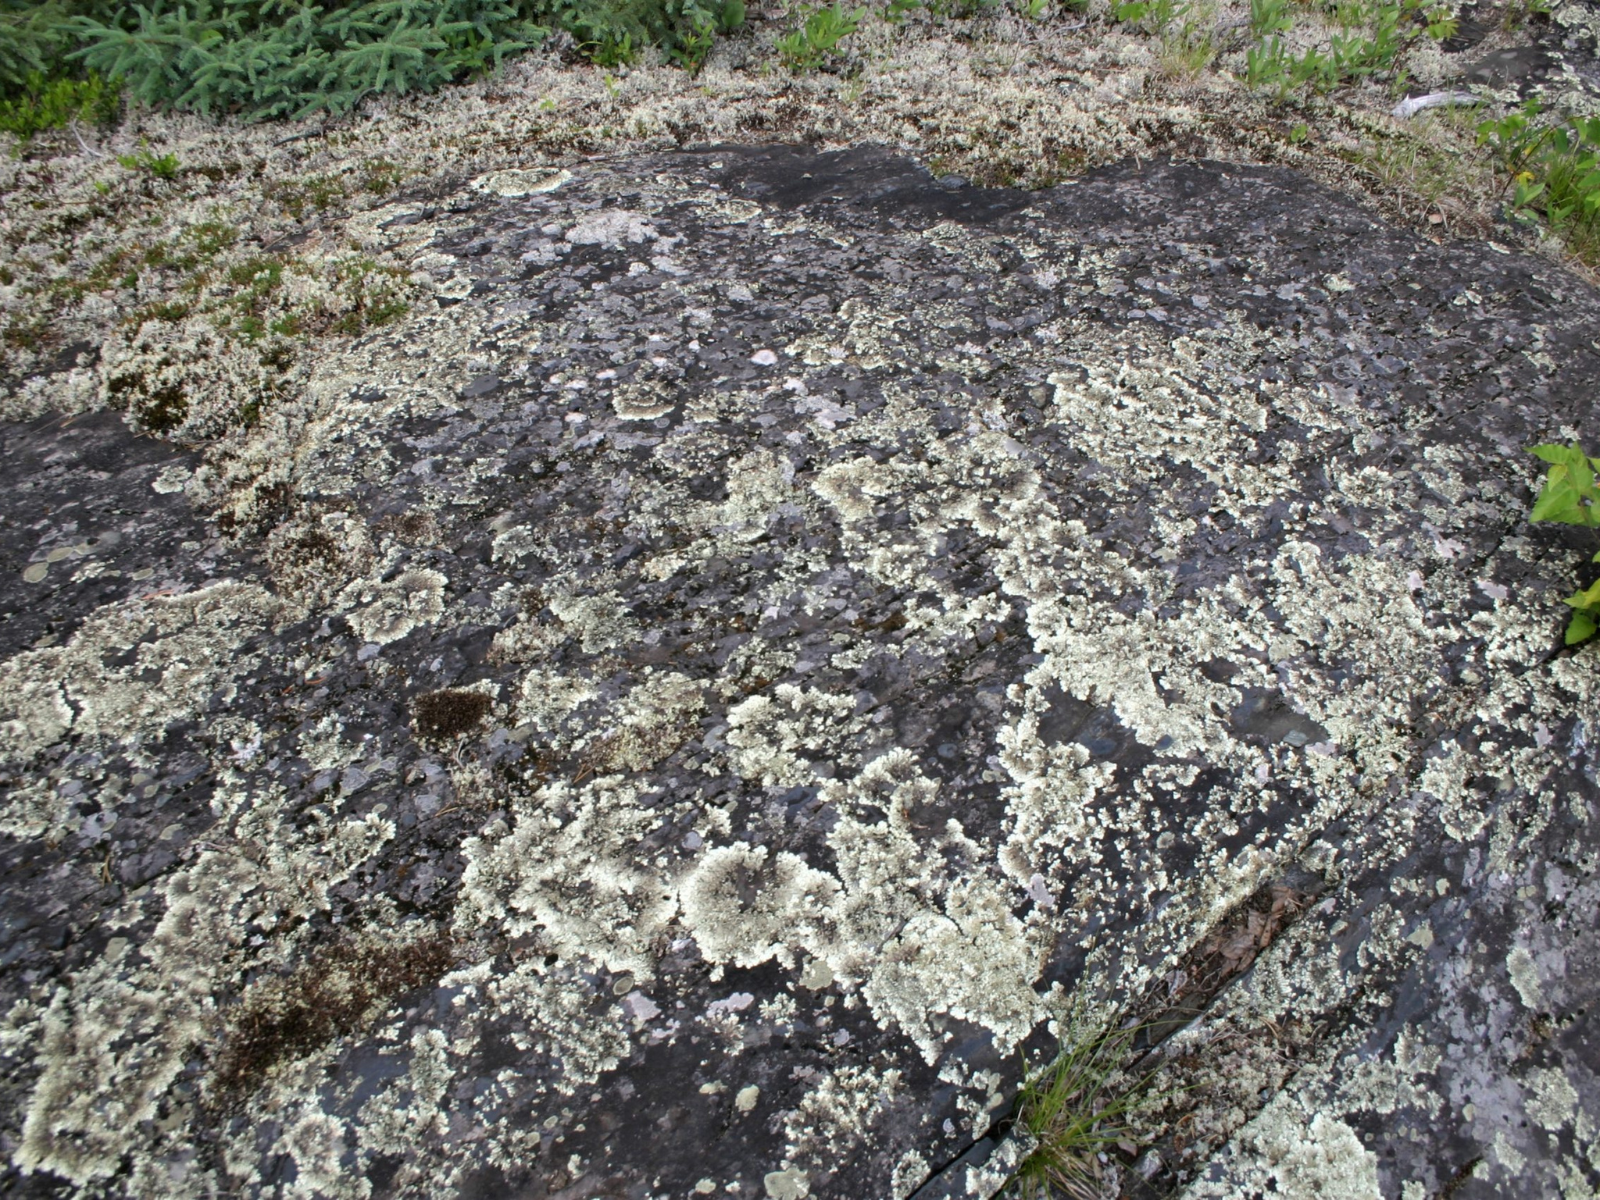 Low-growing white-green lichens growing extensively on a rock surface.